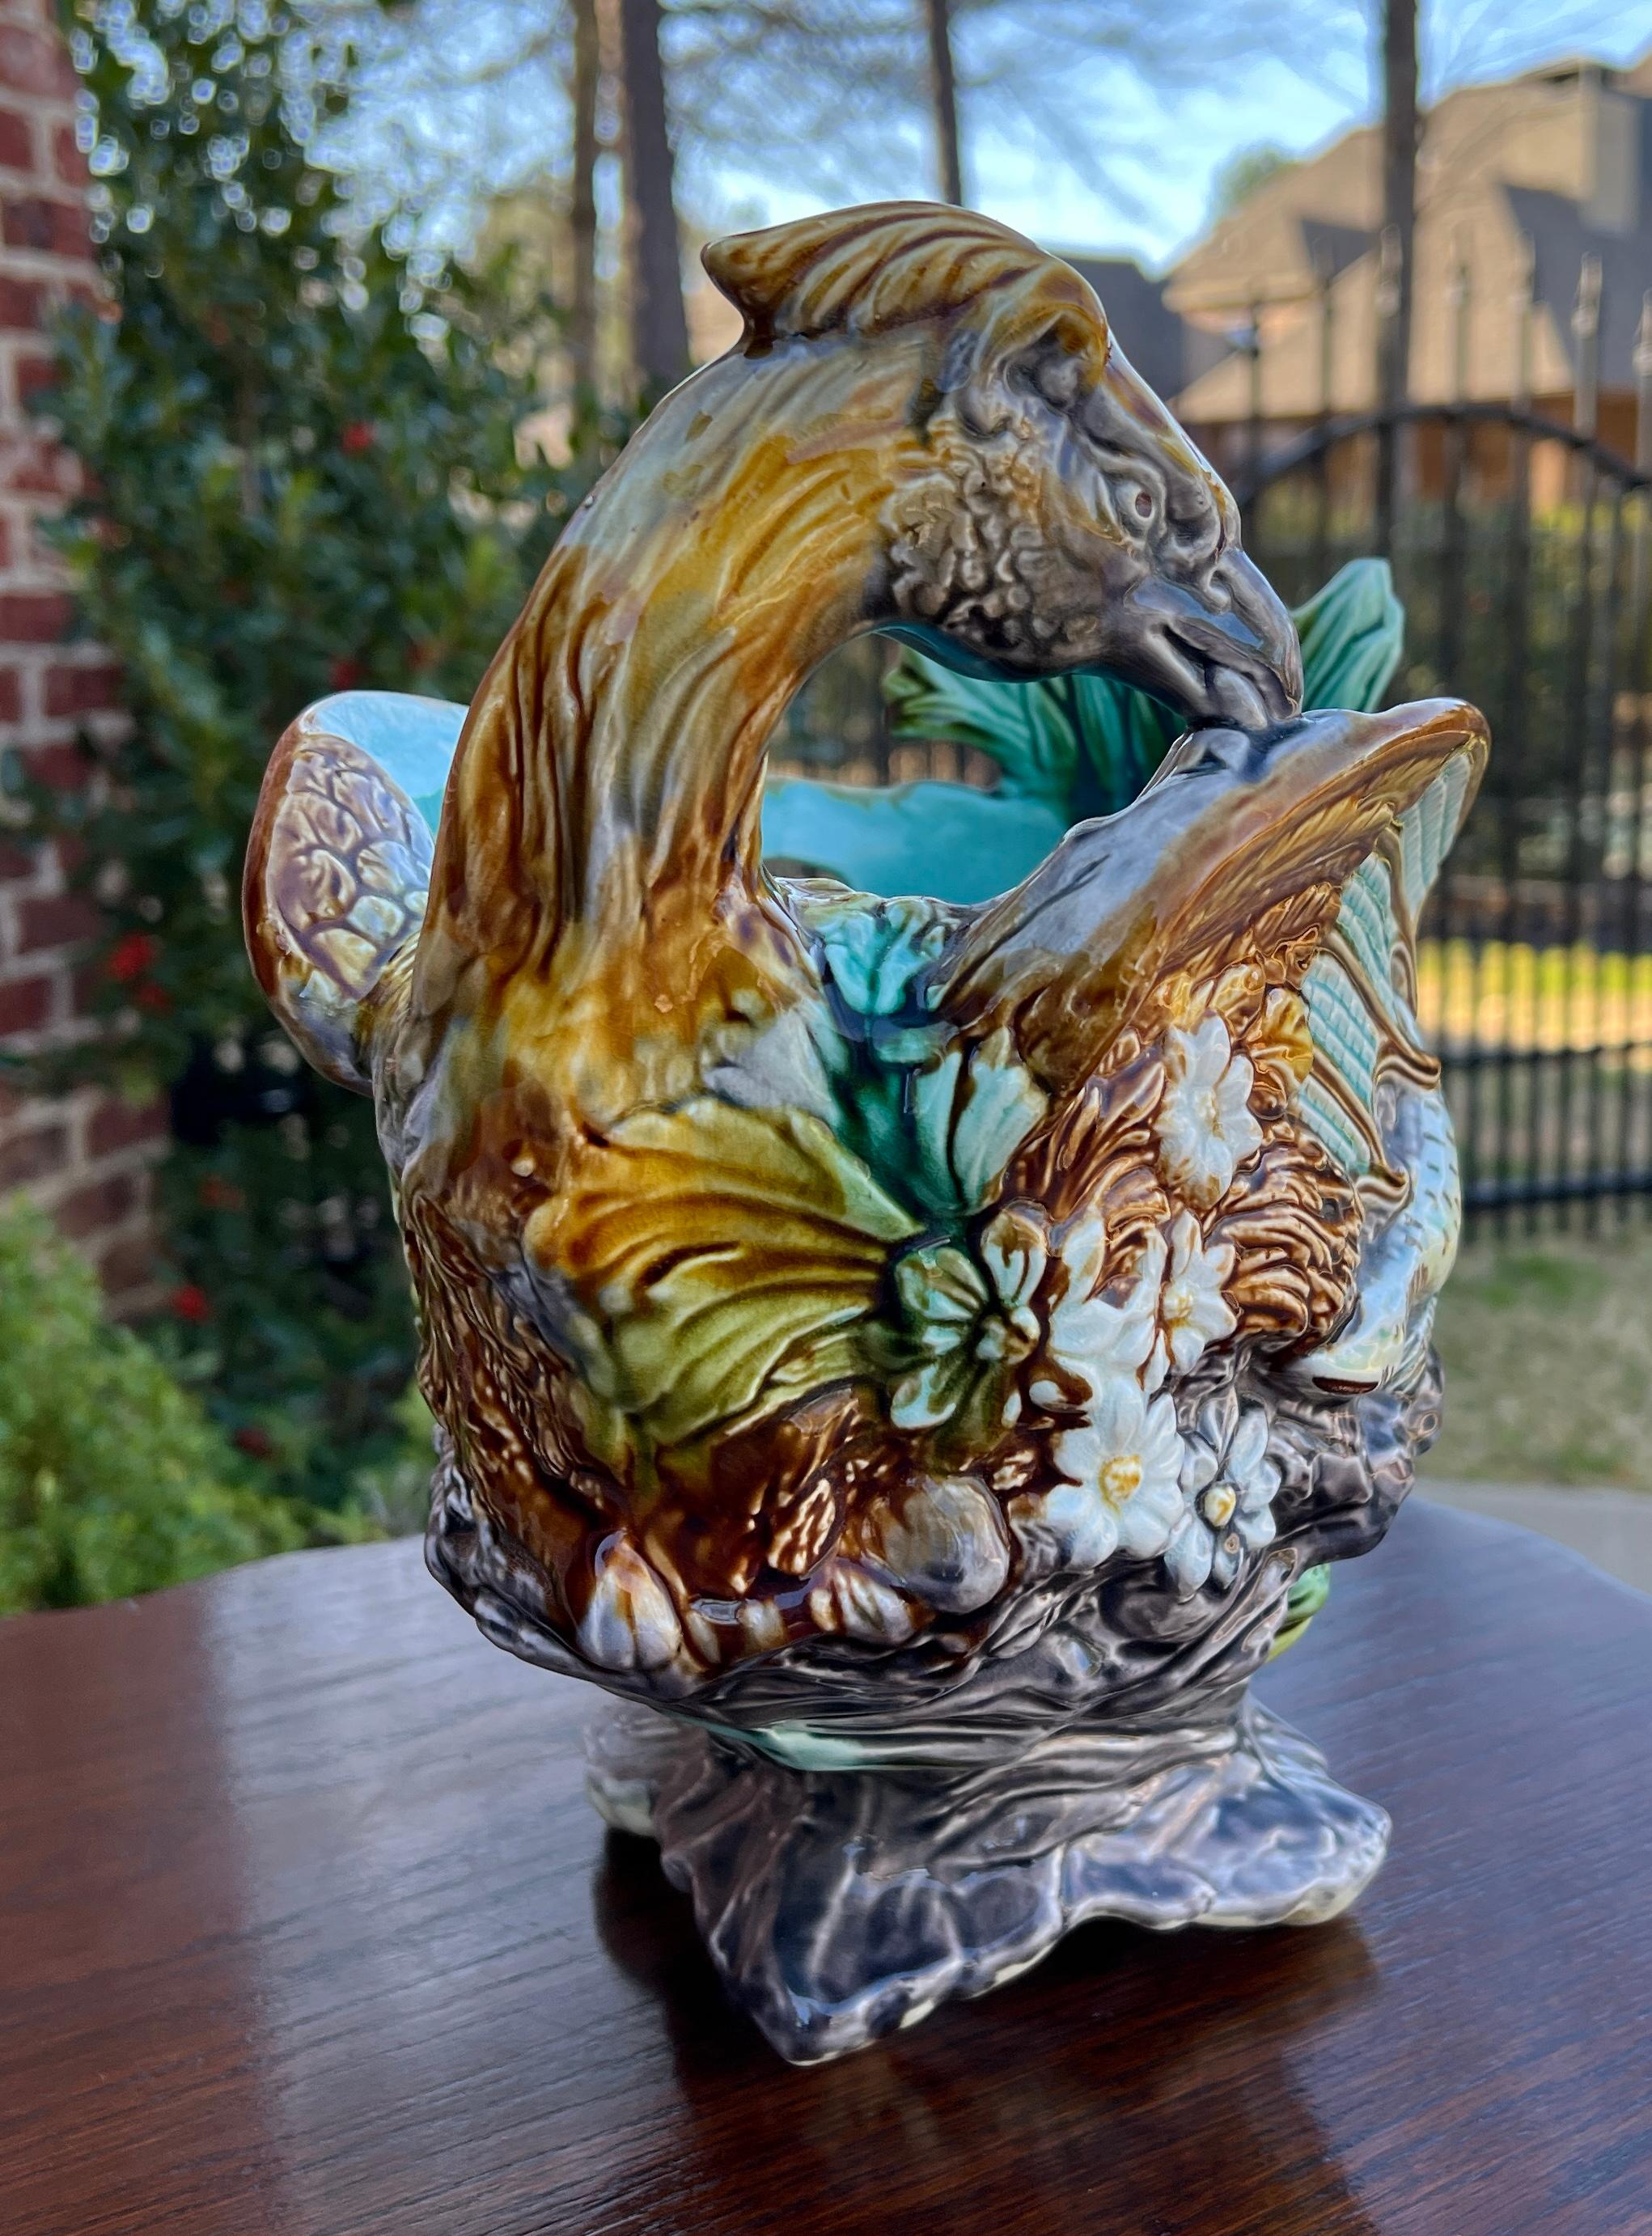 Fired Antique French Majolica Onnaing Cache Pot Planter Bowl Jardiniere Phoenix Bird For Sale